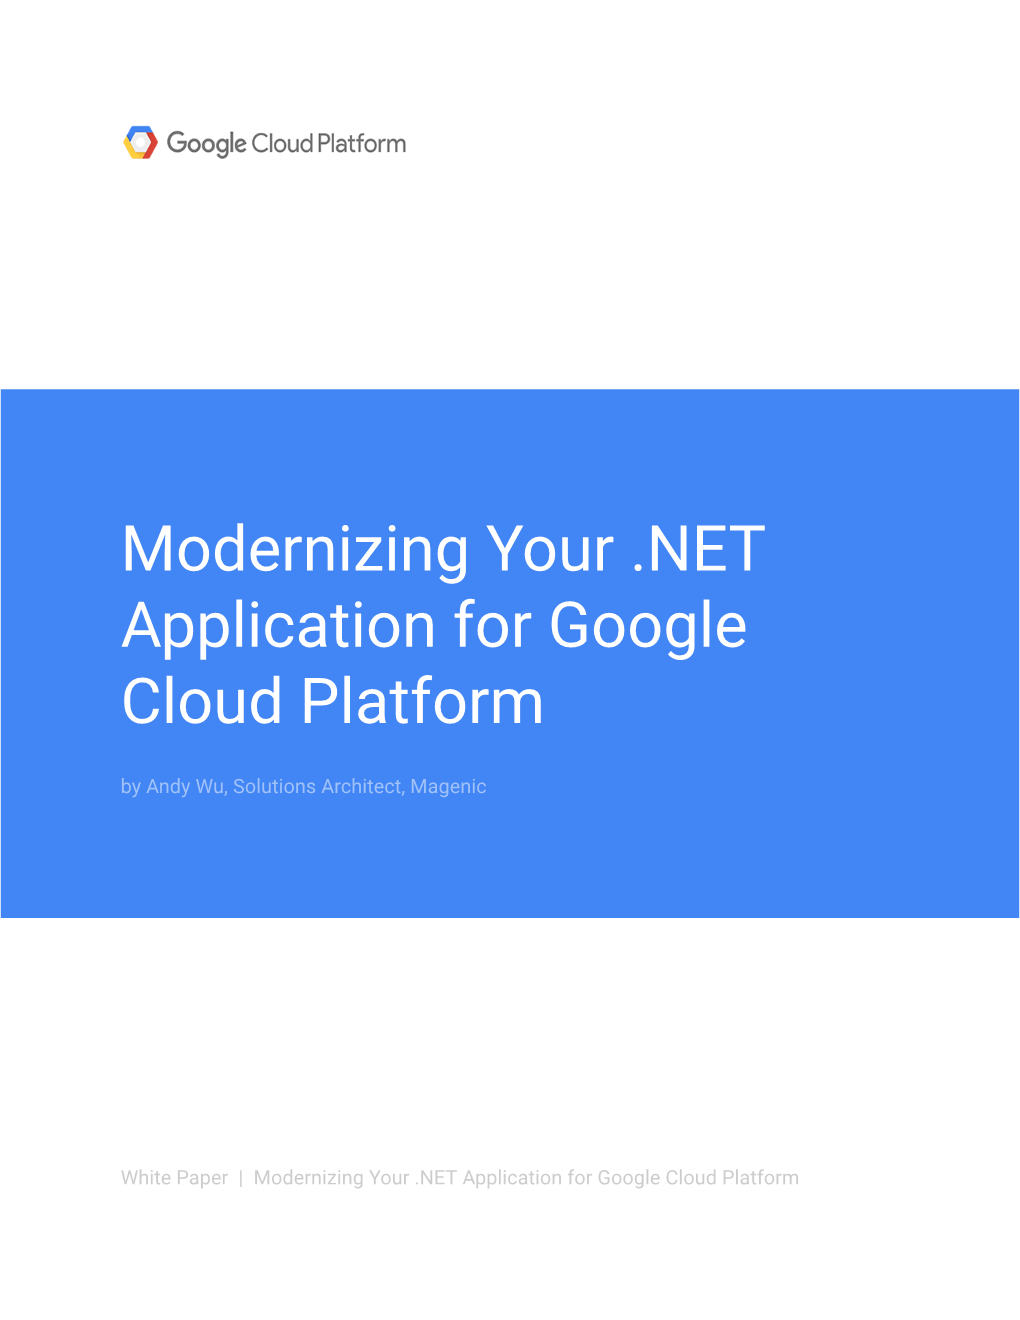 Modernizing Your .NET Application for Google Cloud Platform by Andy Wu, Solutions Architect, Magenic